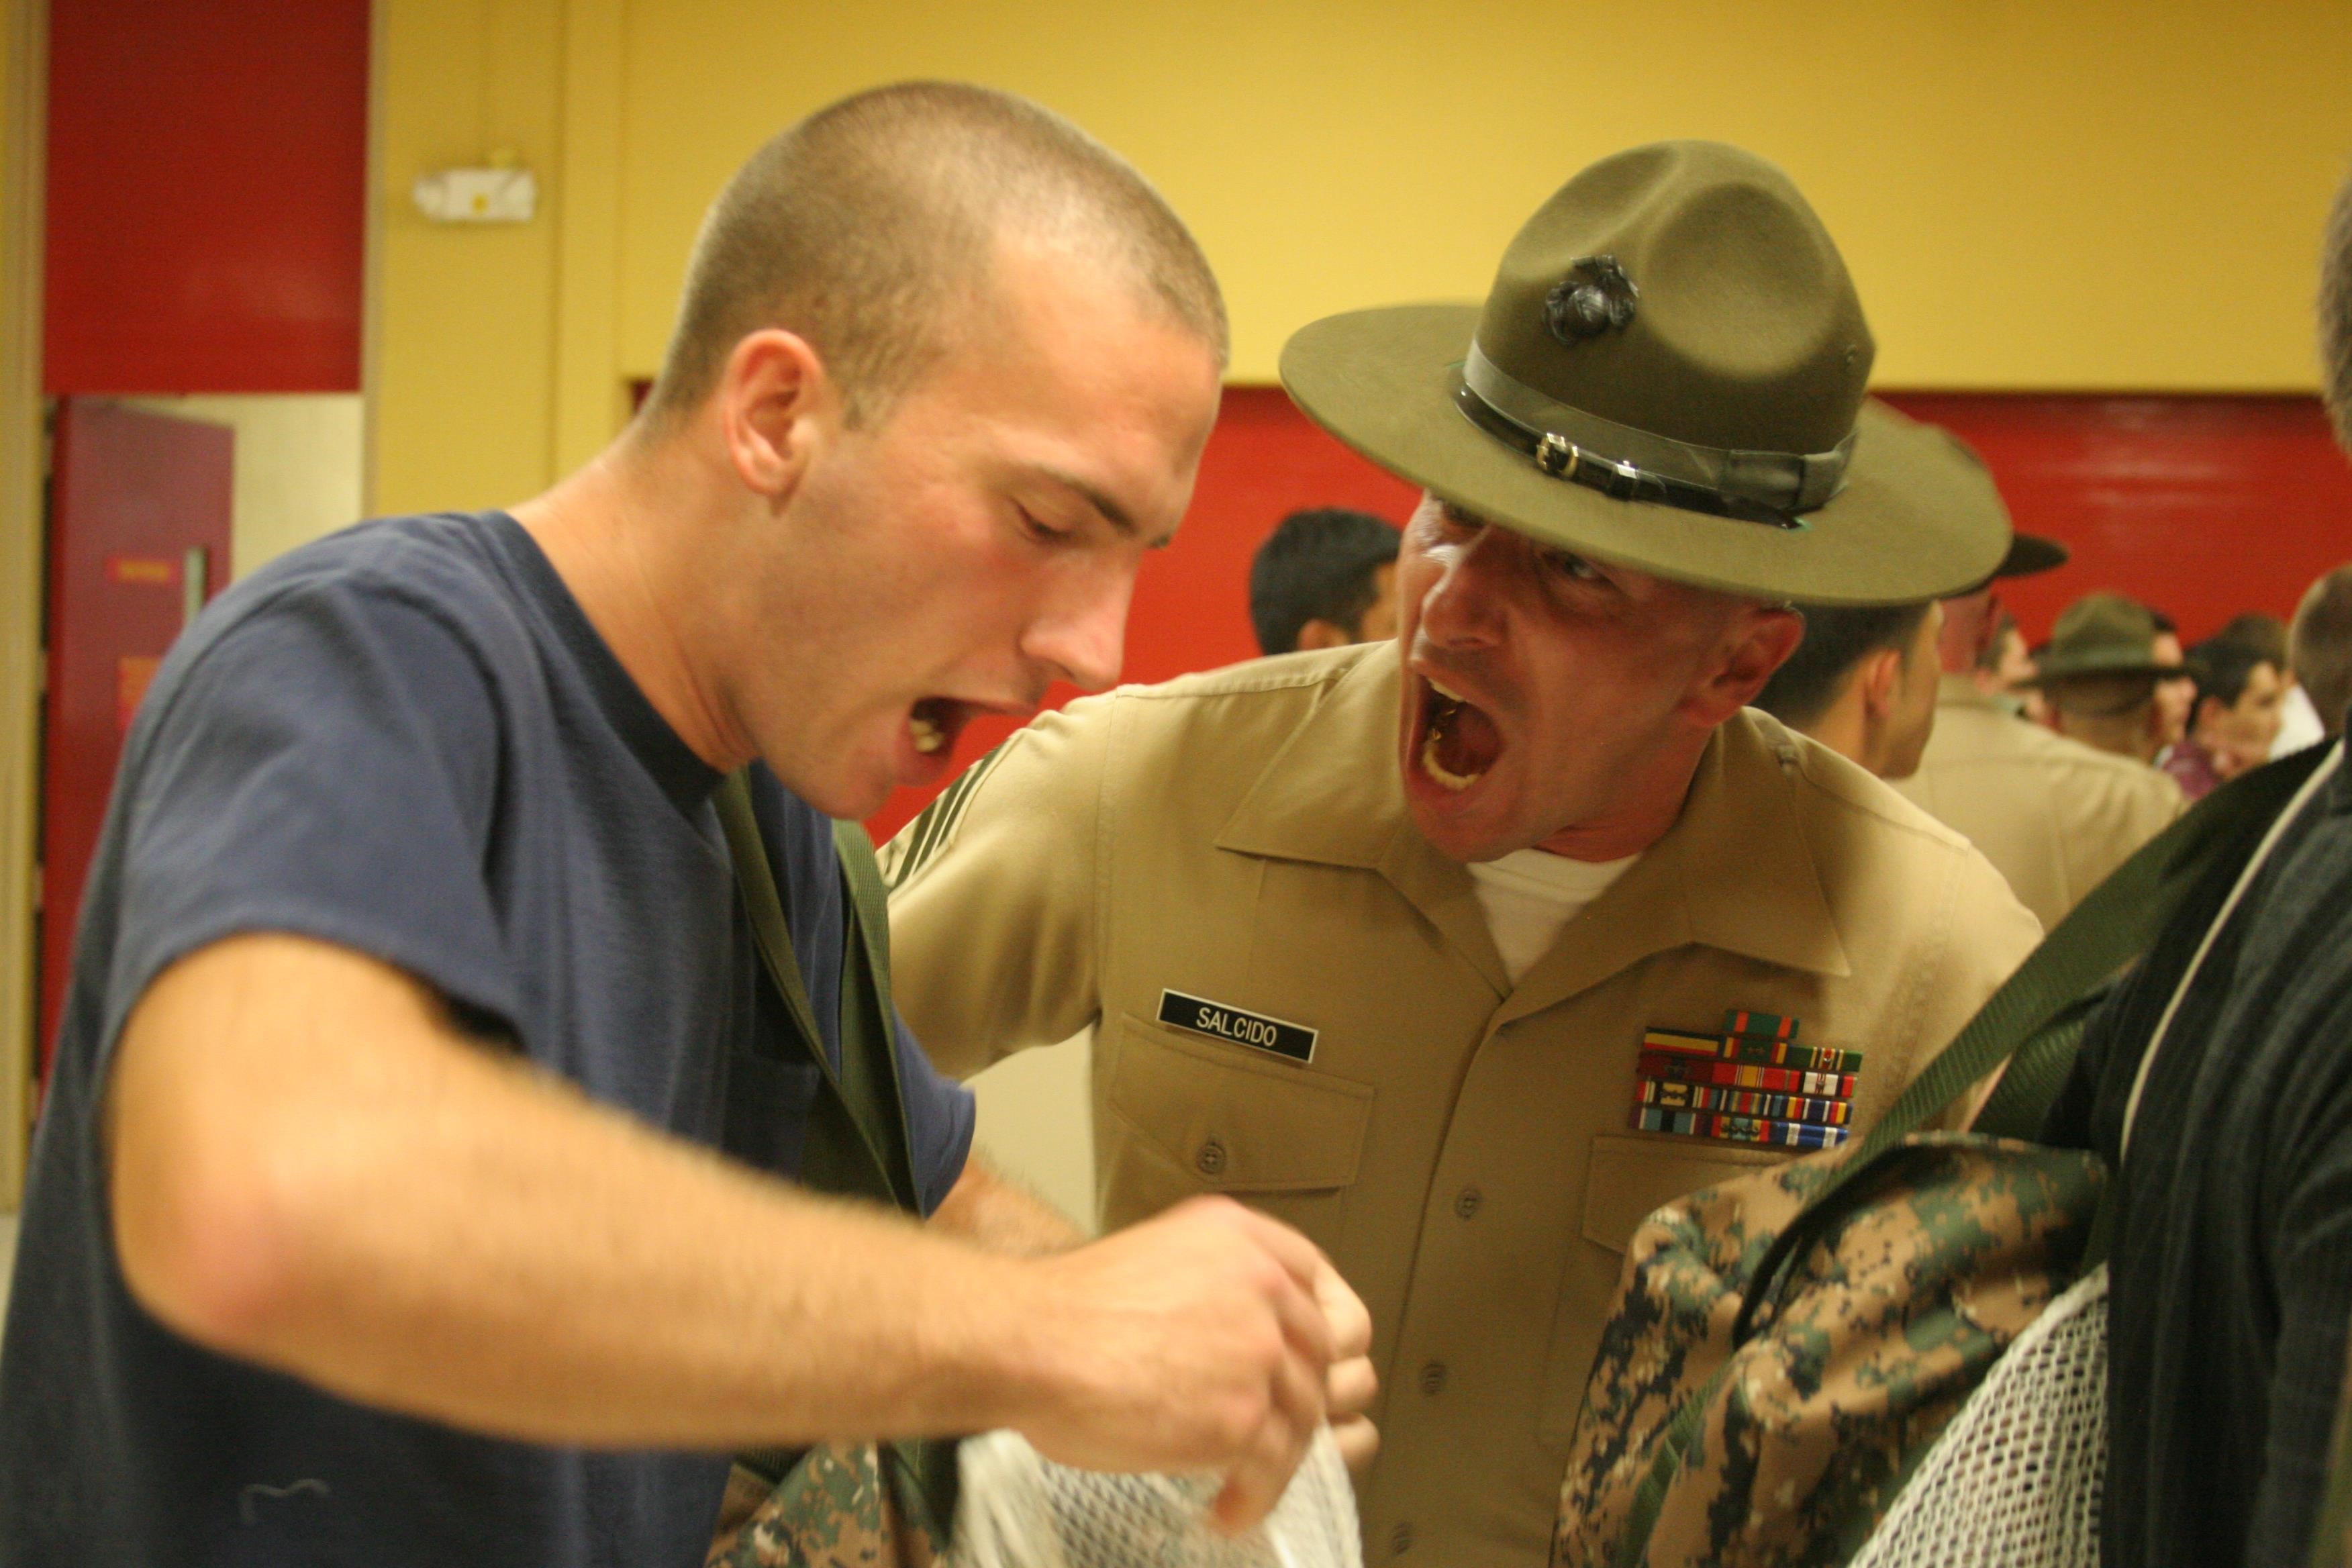 Staff Sgt. Patrick C. Salcido, chief drill instructor, receiving company, Support Battalion, yells at a recruit after he failed to properly follow instructions during receiving week aboard Marine Corps Recruit Depot San Diego June 17. Recruits are expected to move with speed and intensity at all times during recruit training.